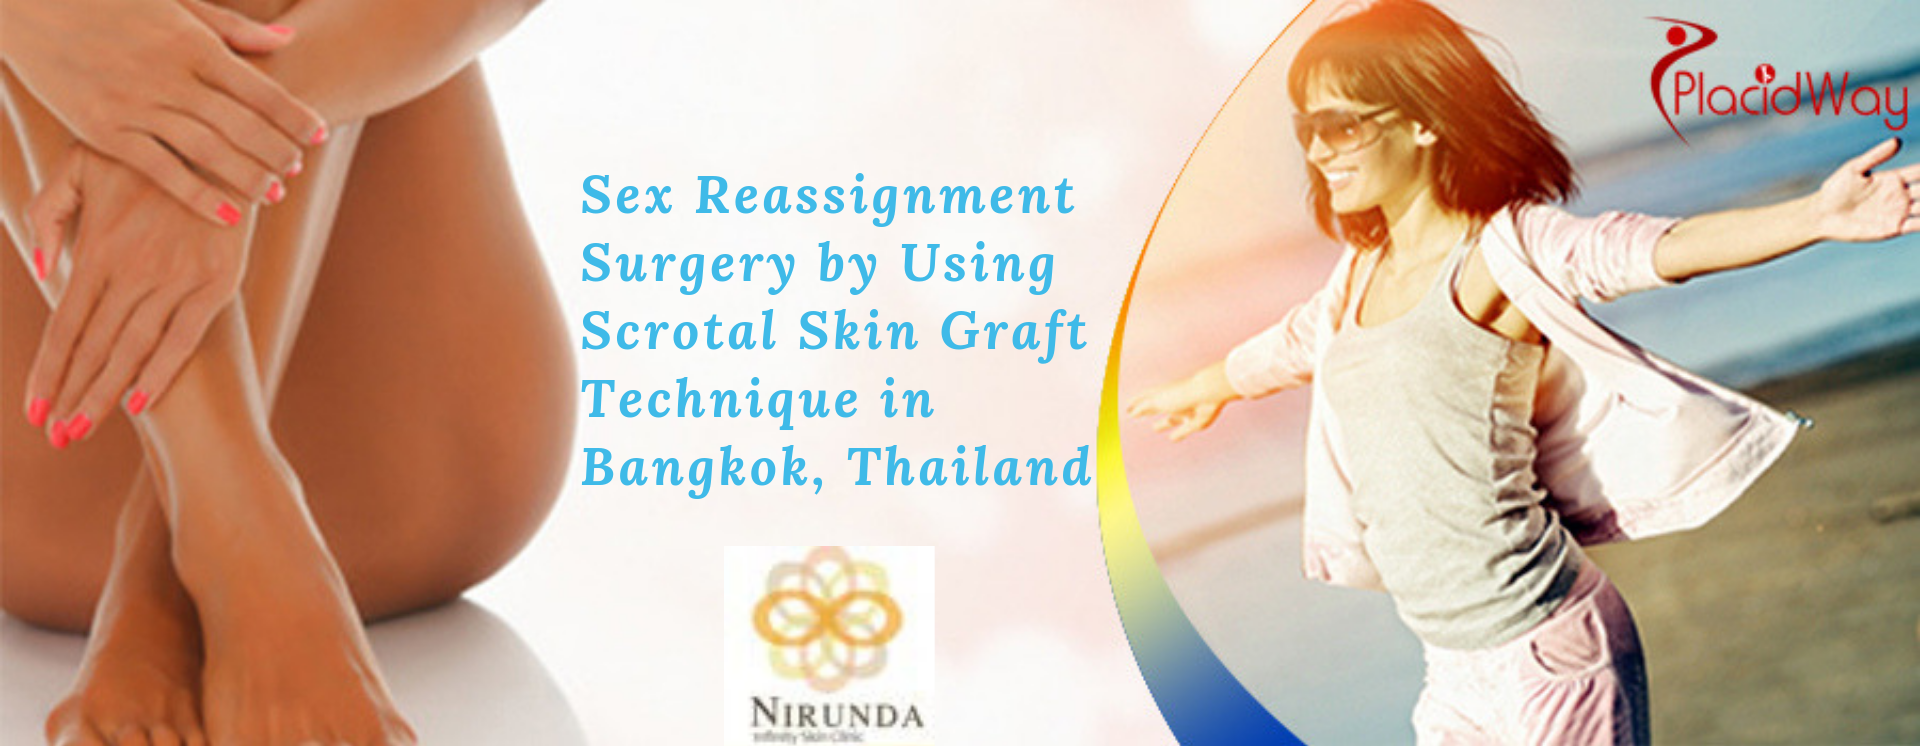 Sex Reassignment Surgery by Using Scrotal Skin Graft Technique in Bangkok, Thailand